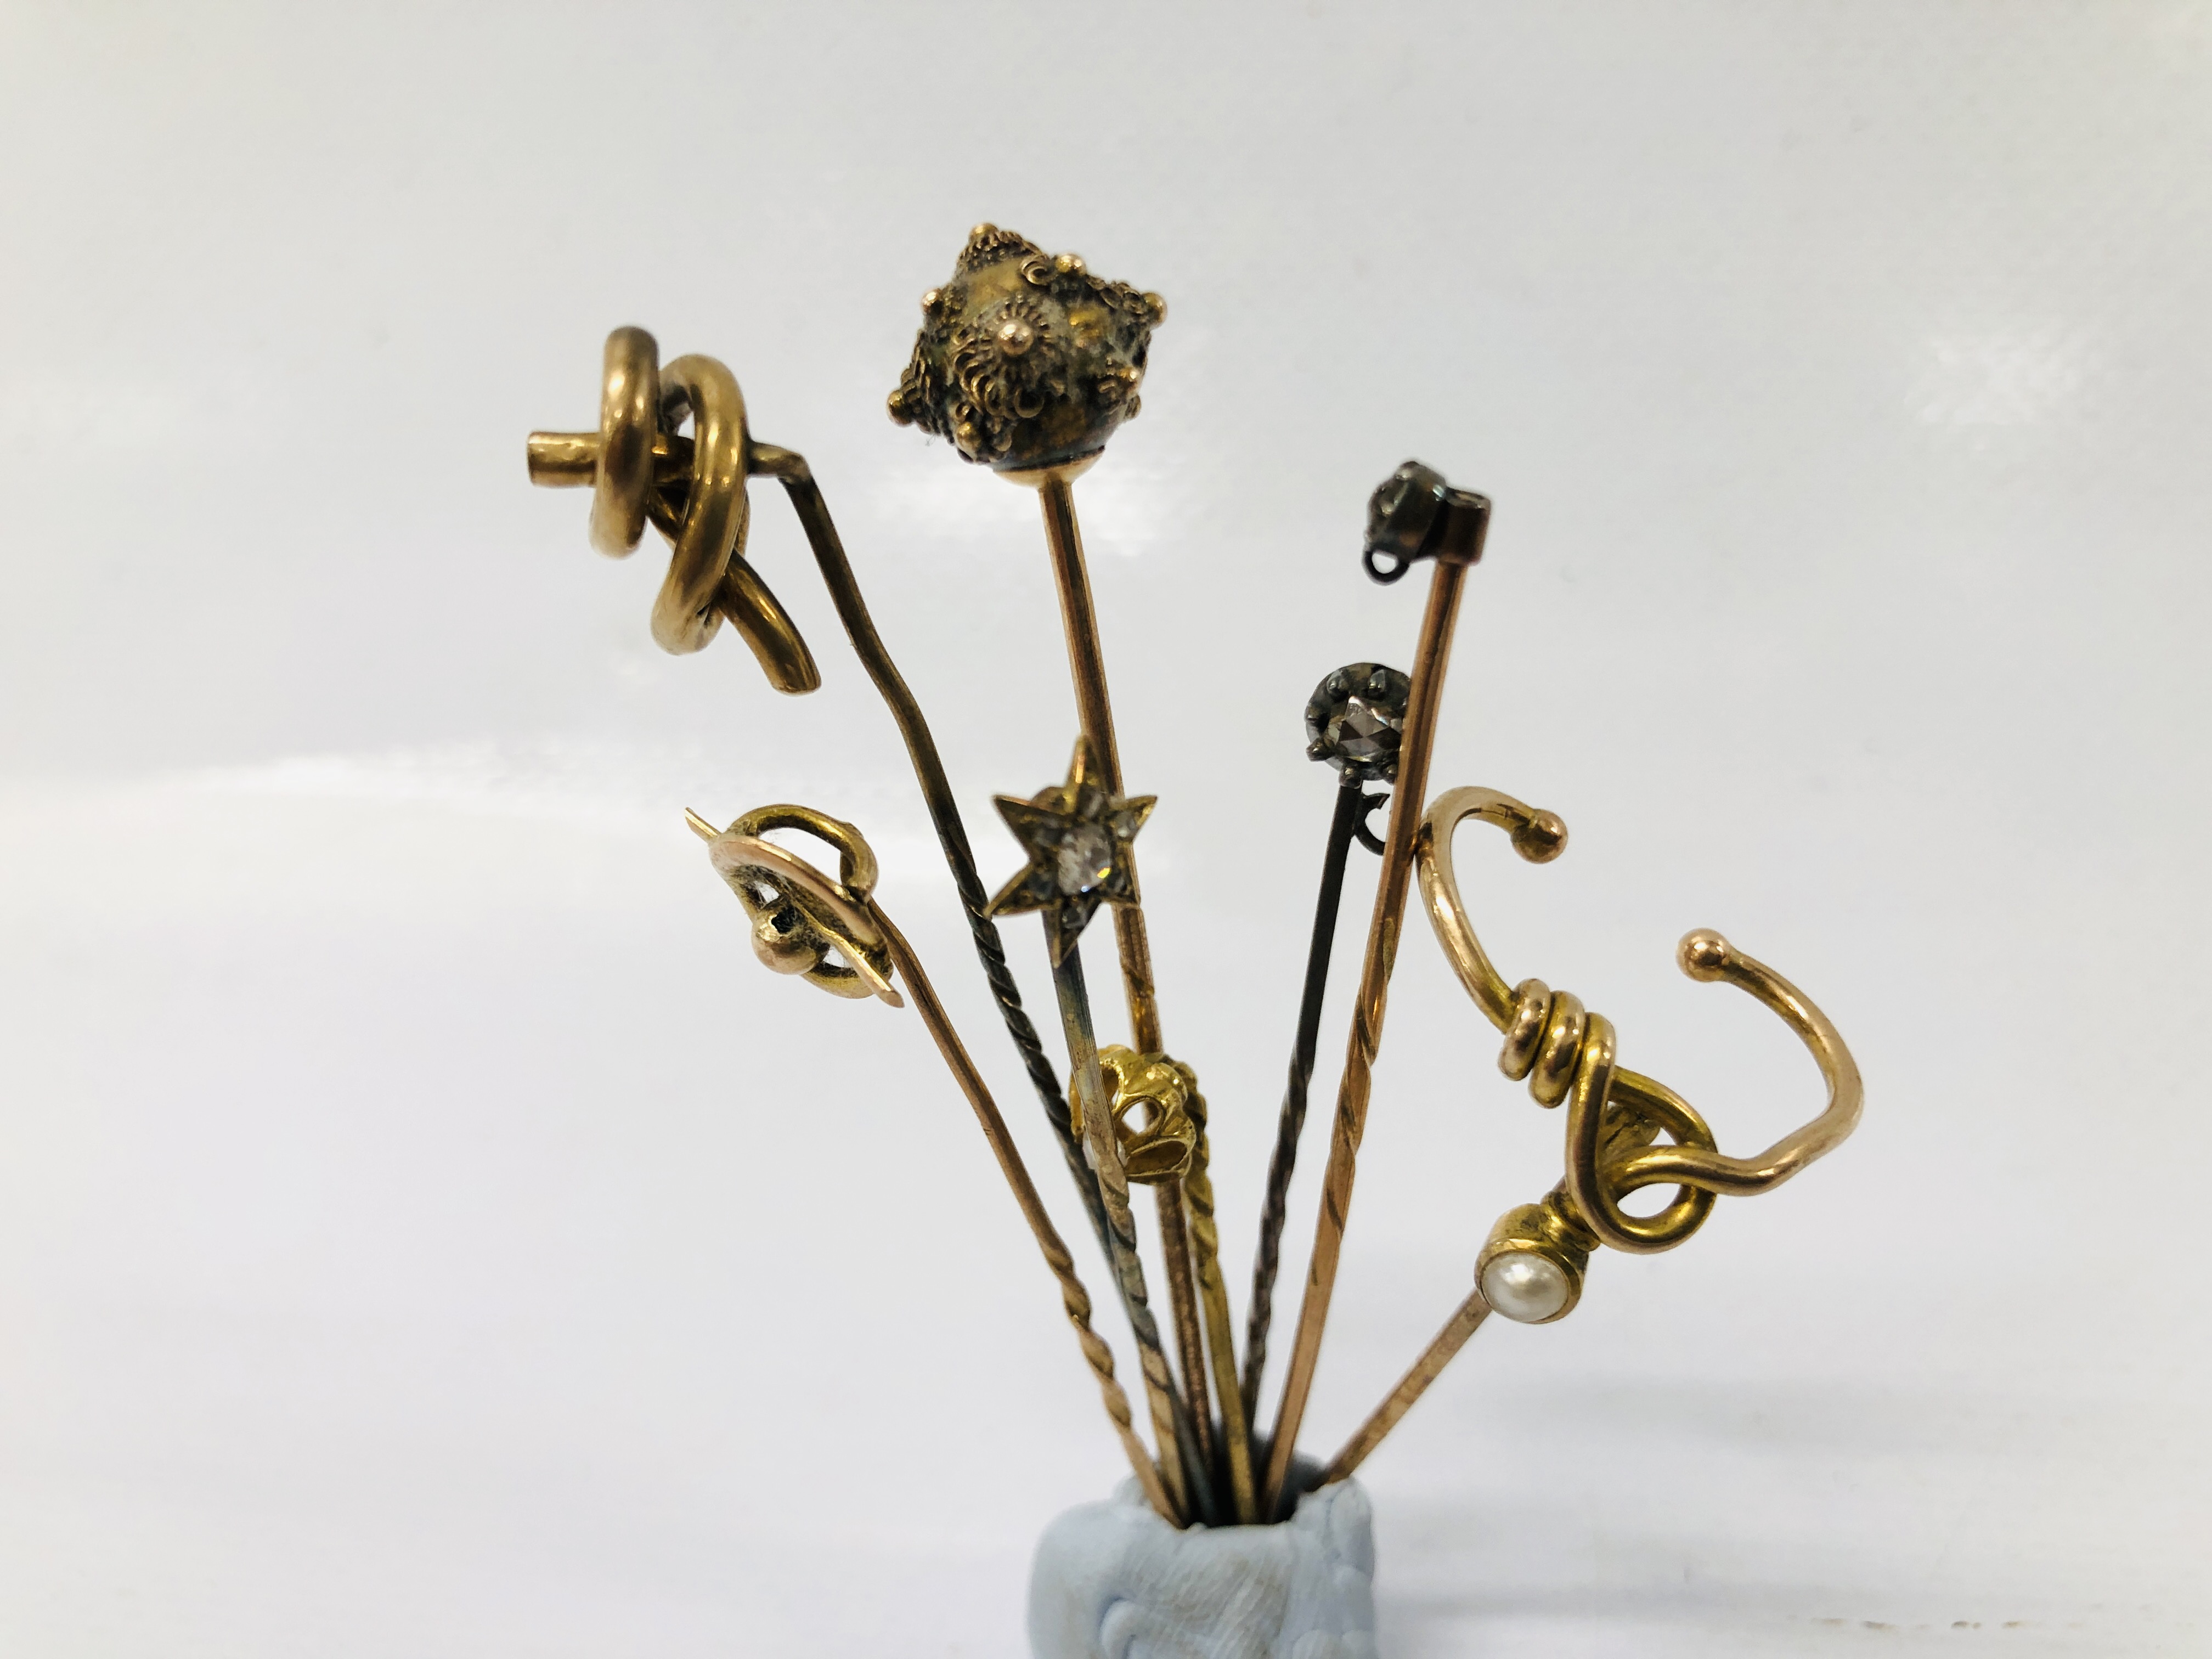 4 X VINTAGE YELLOW METAL STICK PINS ALONG WITH A FURTHER 4 DIAMOND SET STICK PINS - Image 2 of 4